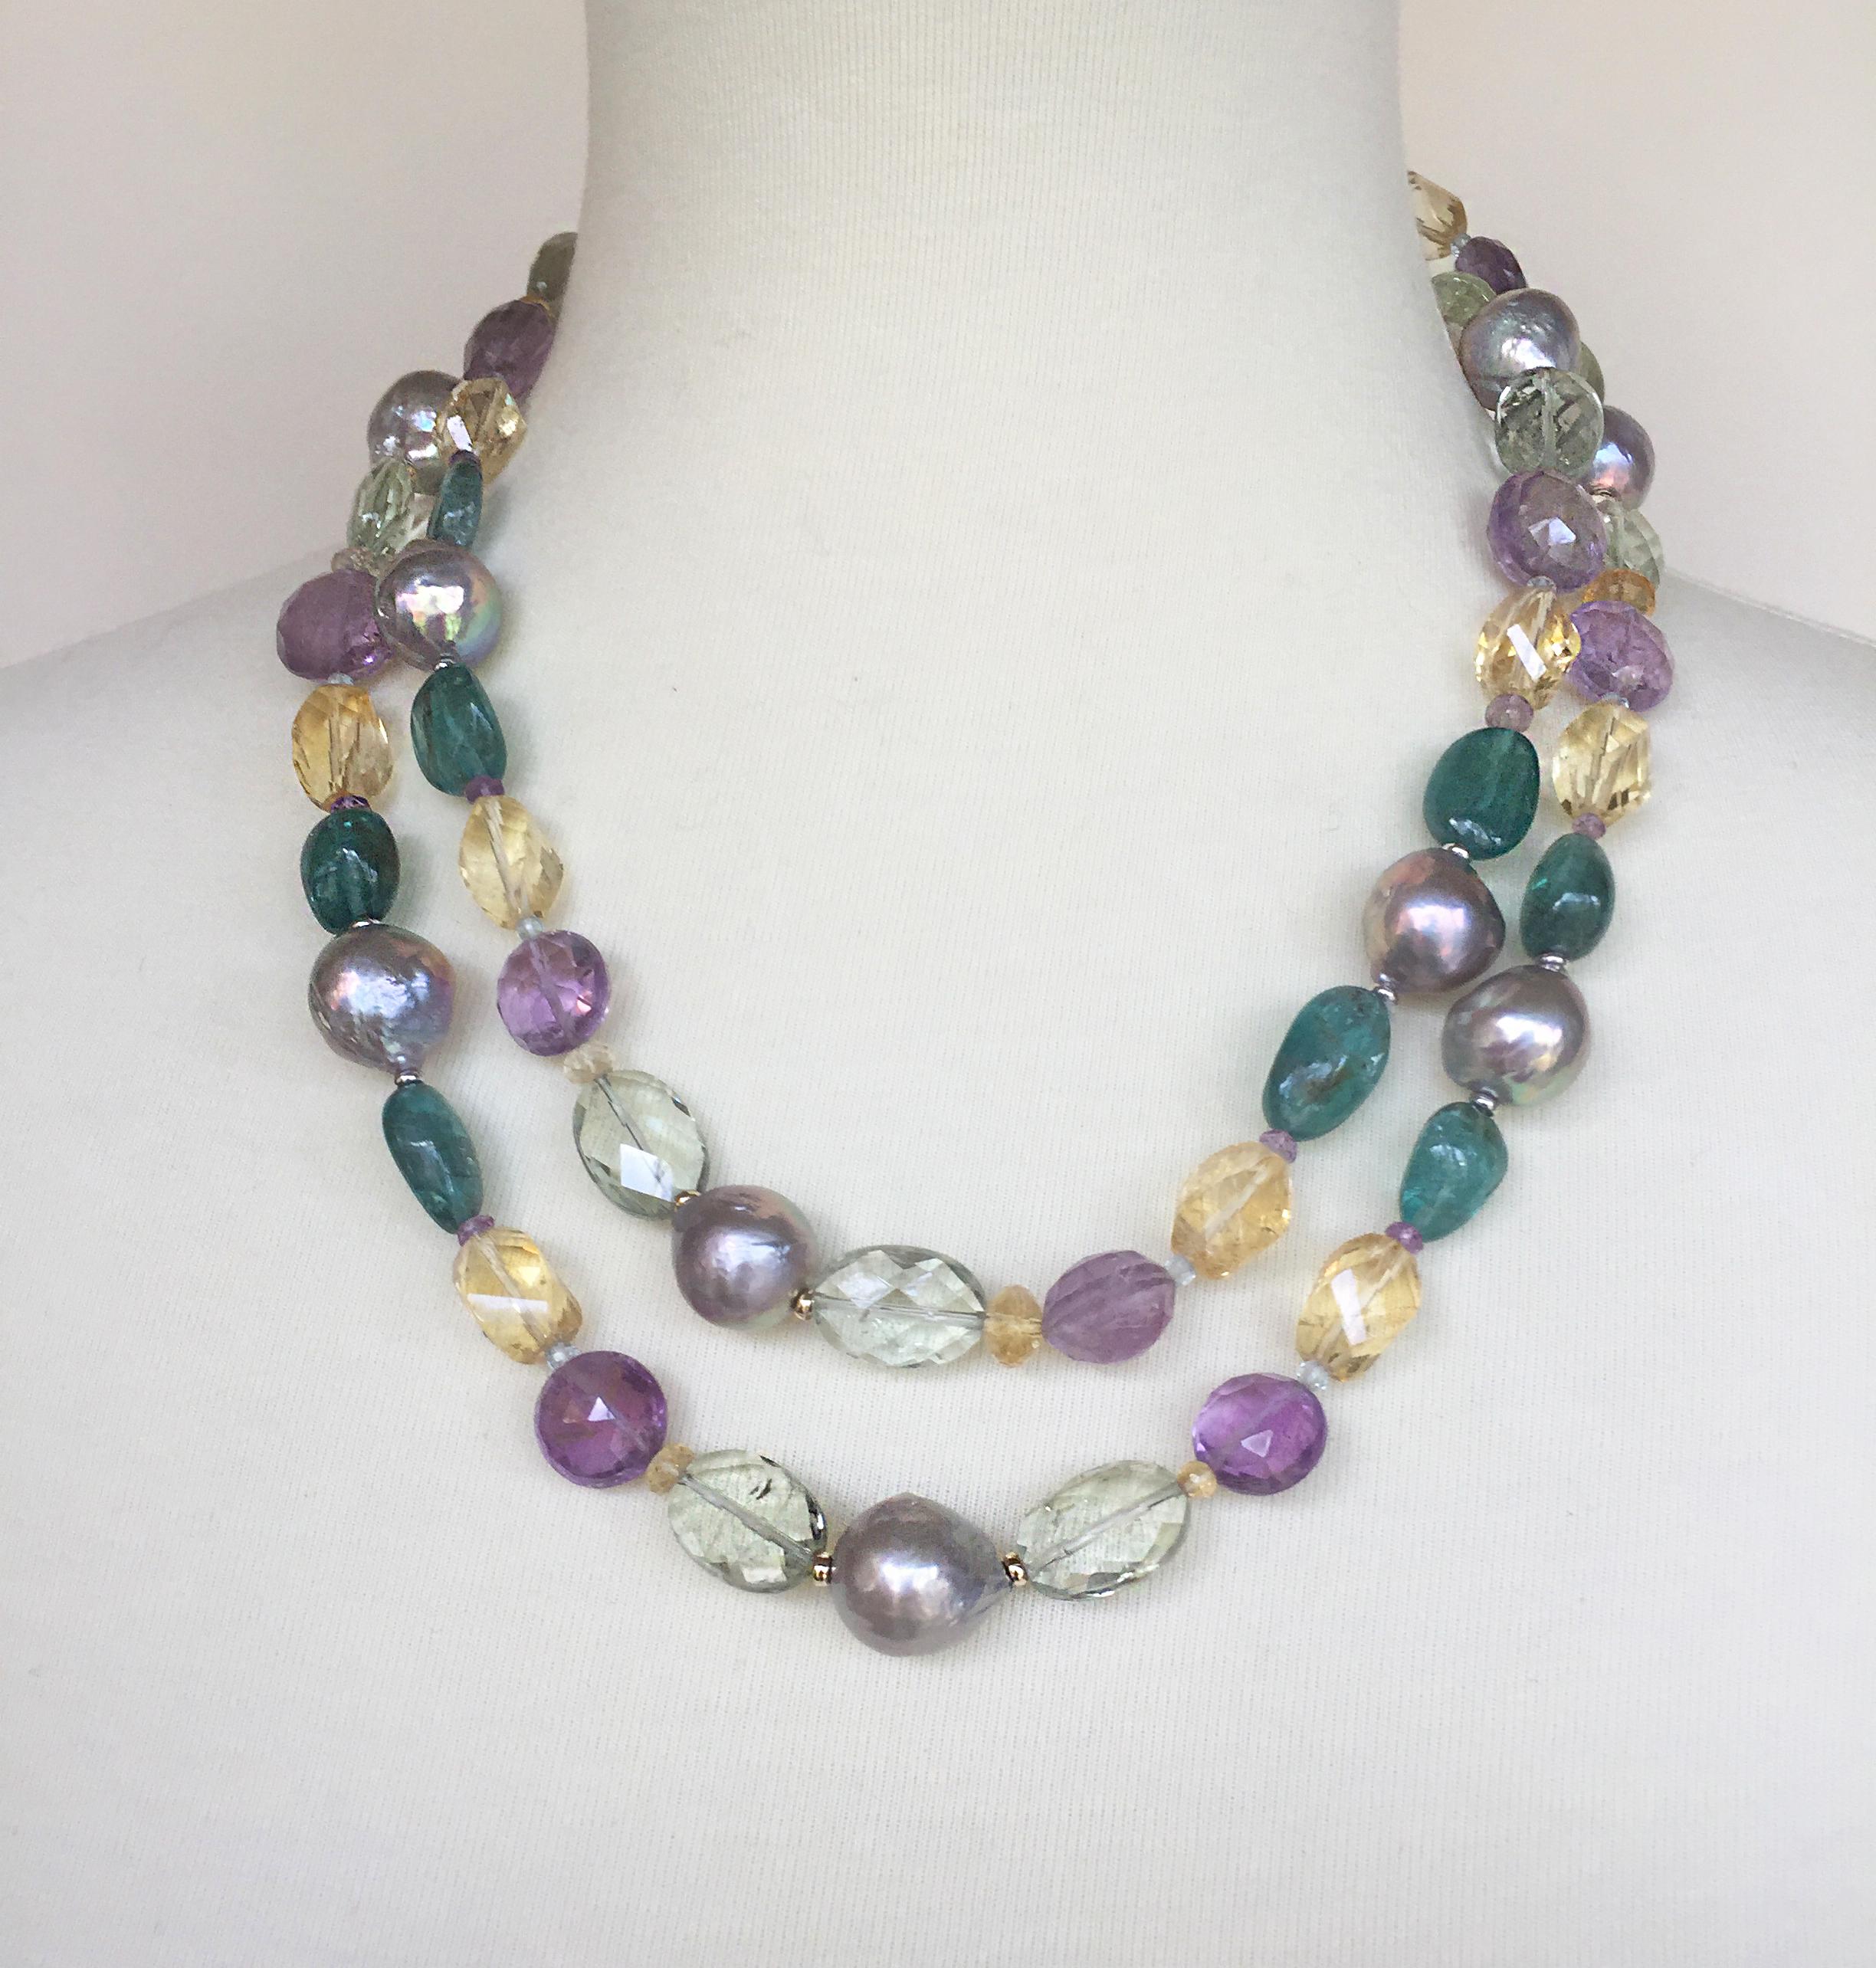 This pearl, amethyst, citrine, and blue topaz necklace with 14k white and yellow gold is beautifully colorful, with different semi-precious stone beads. The large baroque grey pearls, green and purple amethyst, citrine, and London blue topaz shine